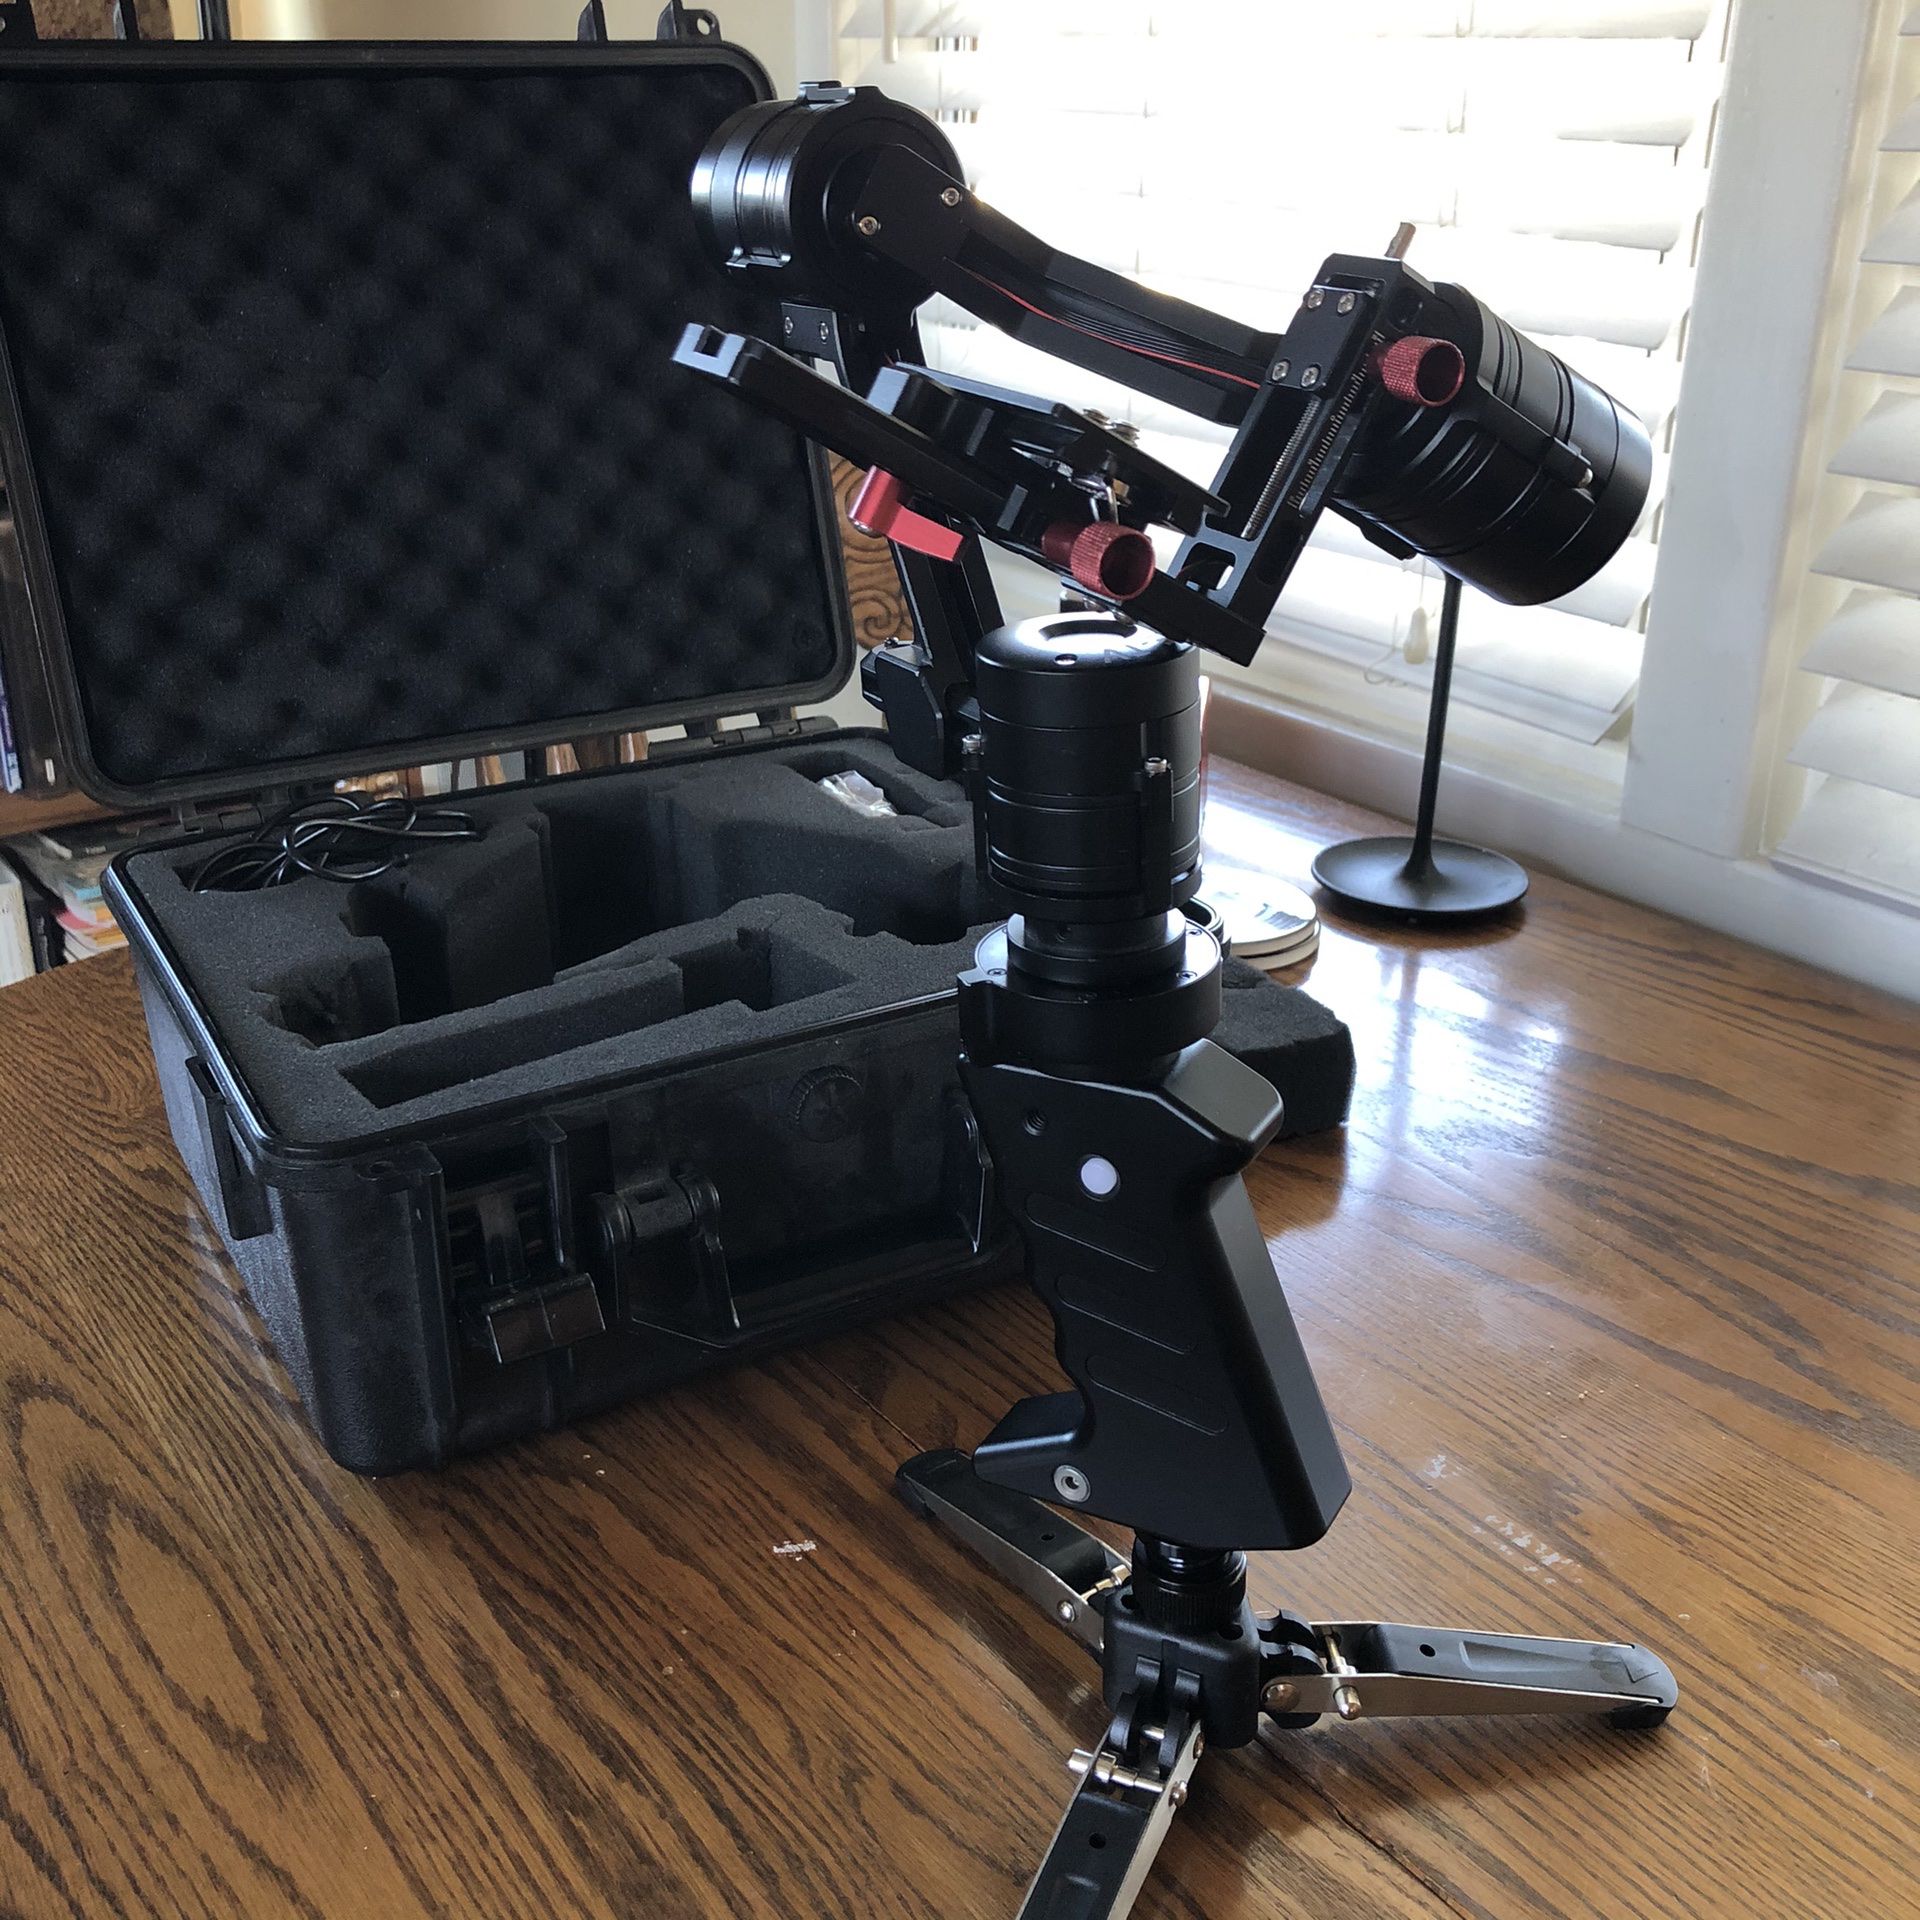 CAME-Single 3- AXIS GIMBAL Camera Stabilizer